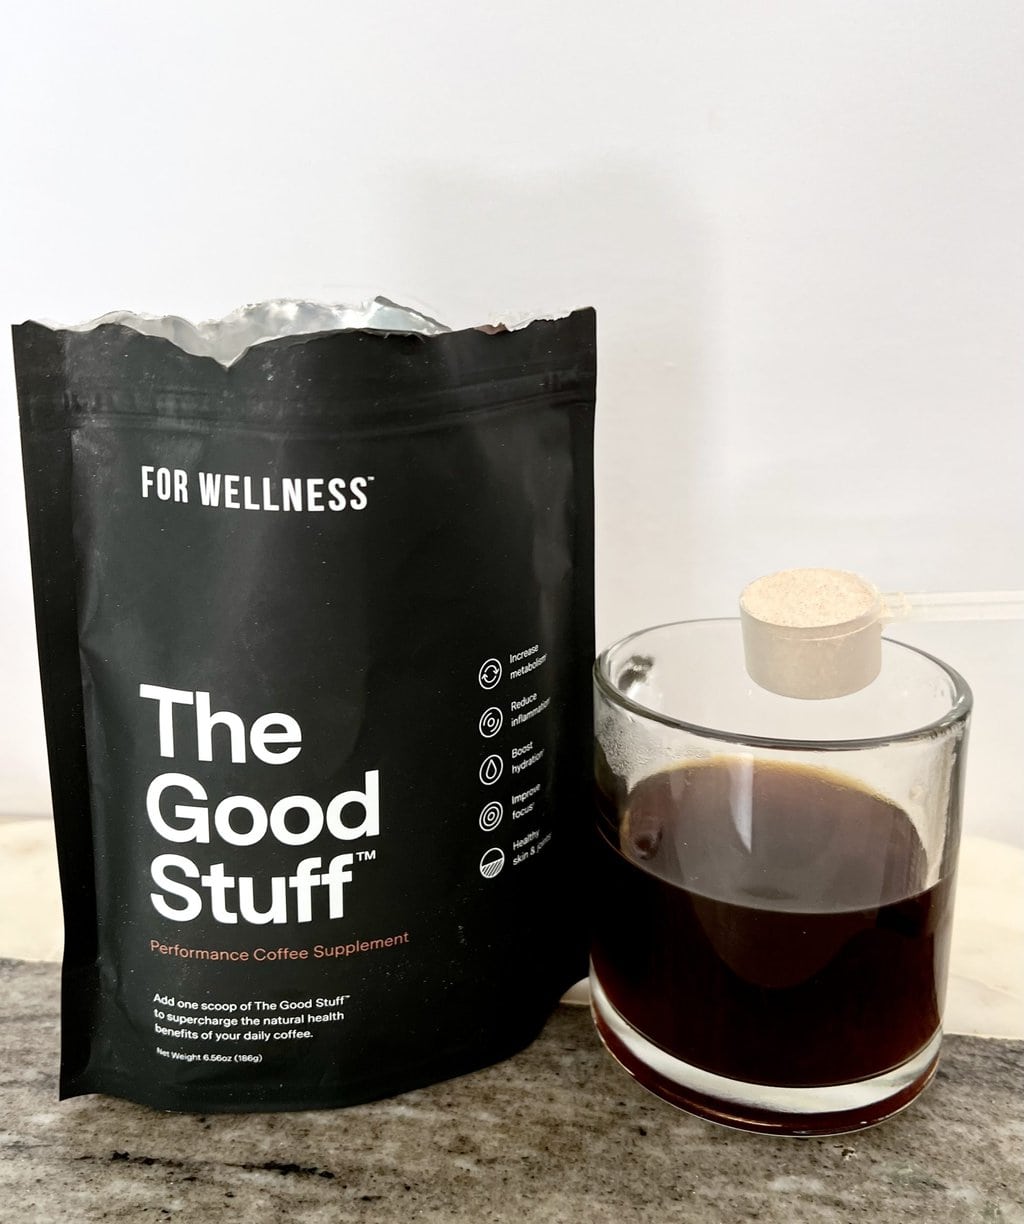 For Wellness The Good Stuff package is next to a brewed cup of coffee